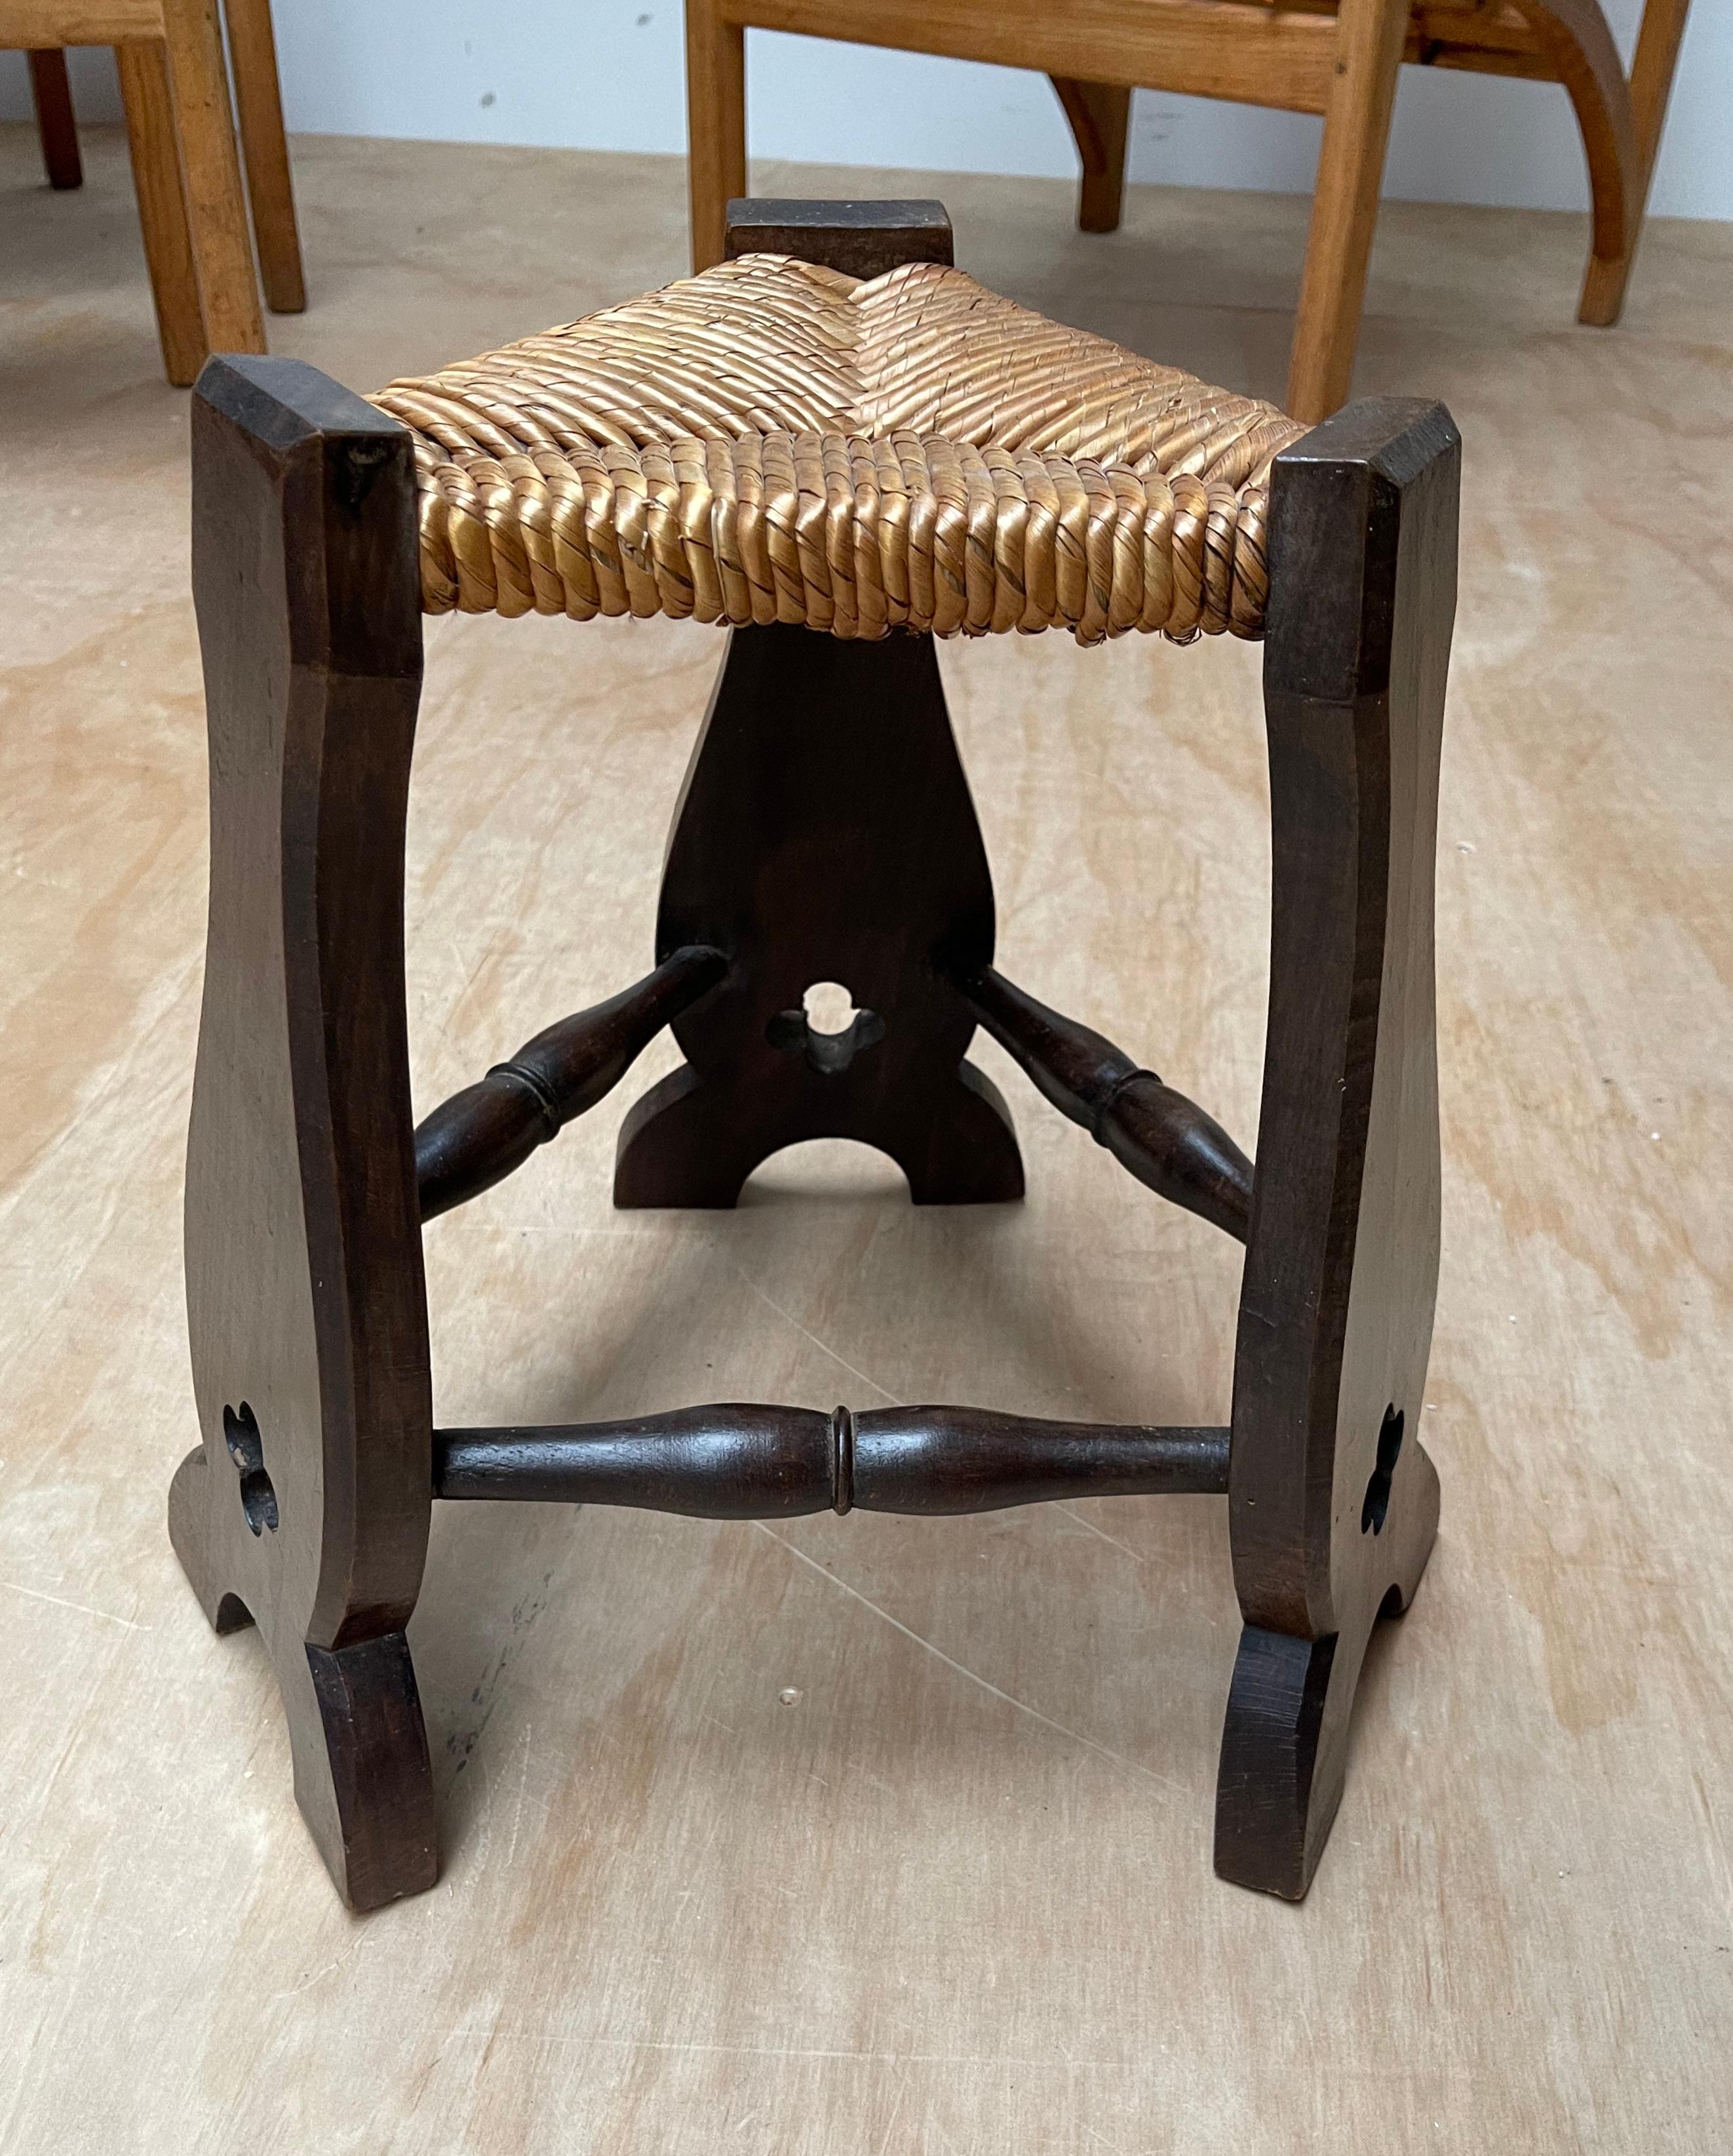 One very stylish, medieval looking, little antique stool created in the Arts & Crafts era.

In the Arts & Crafts era many artisans experimented with incorporating different styles in their designs. Without the open, Gothic quatrefoil style elements